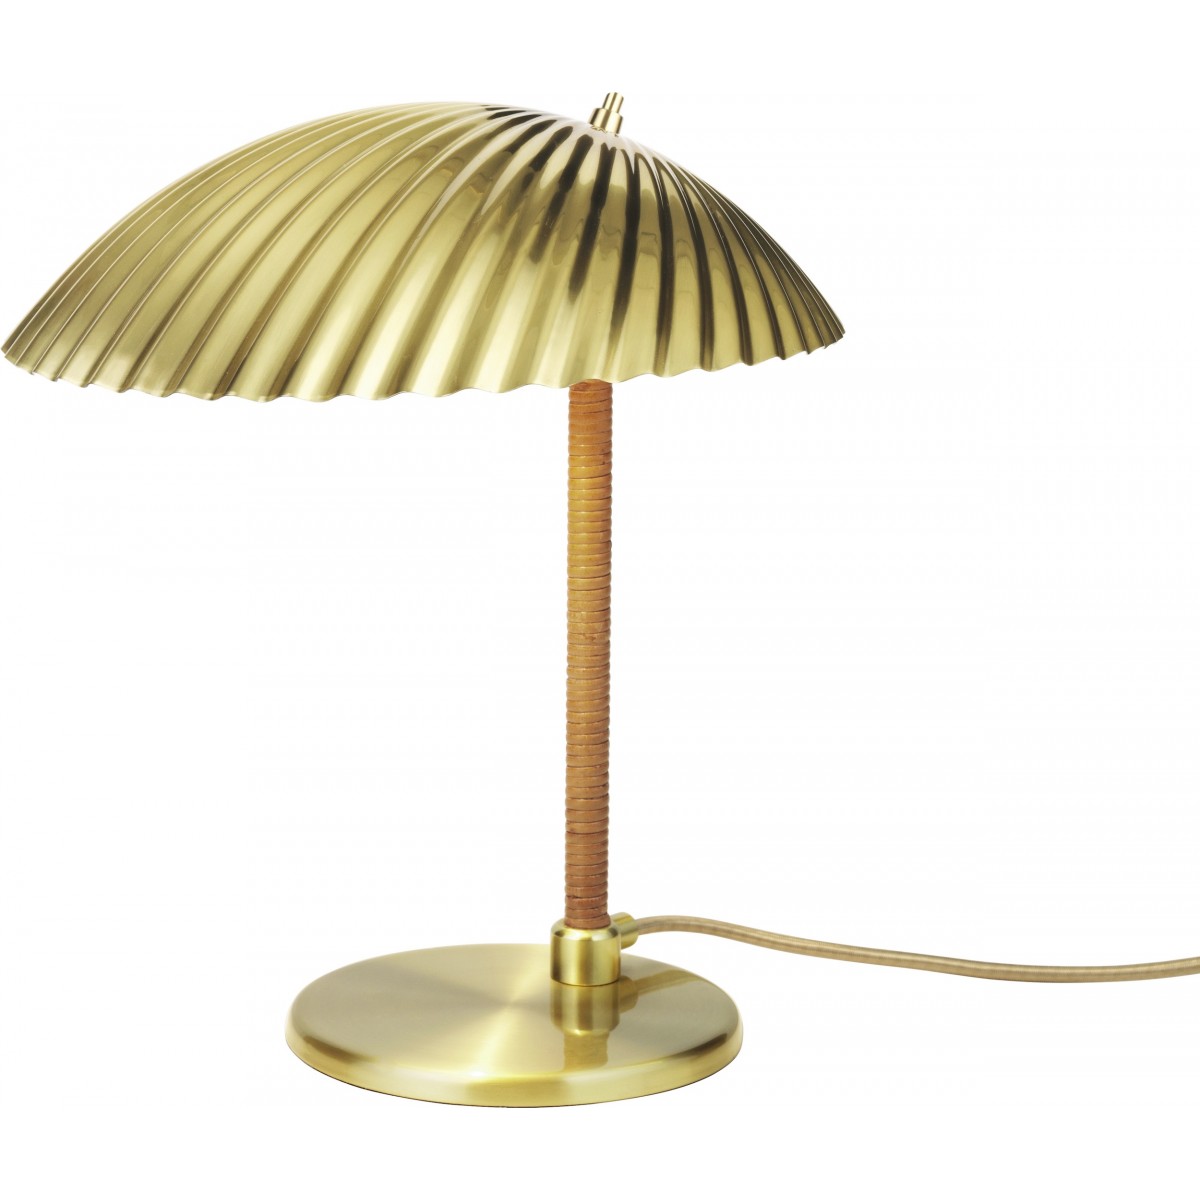 5321 table lamp - Paavo Tynell